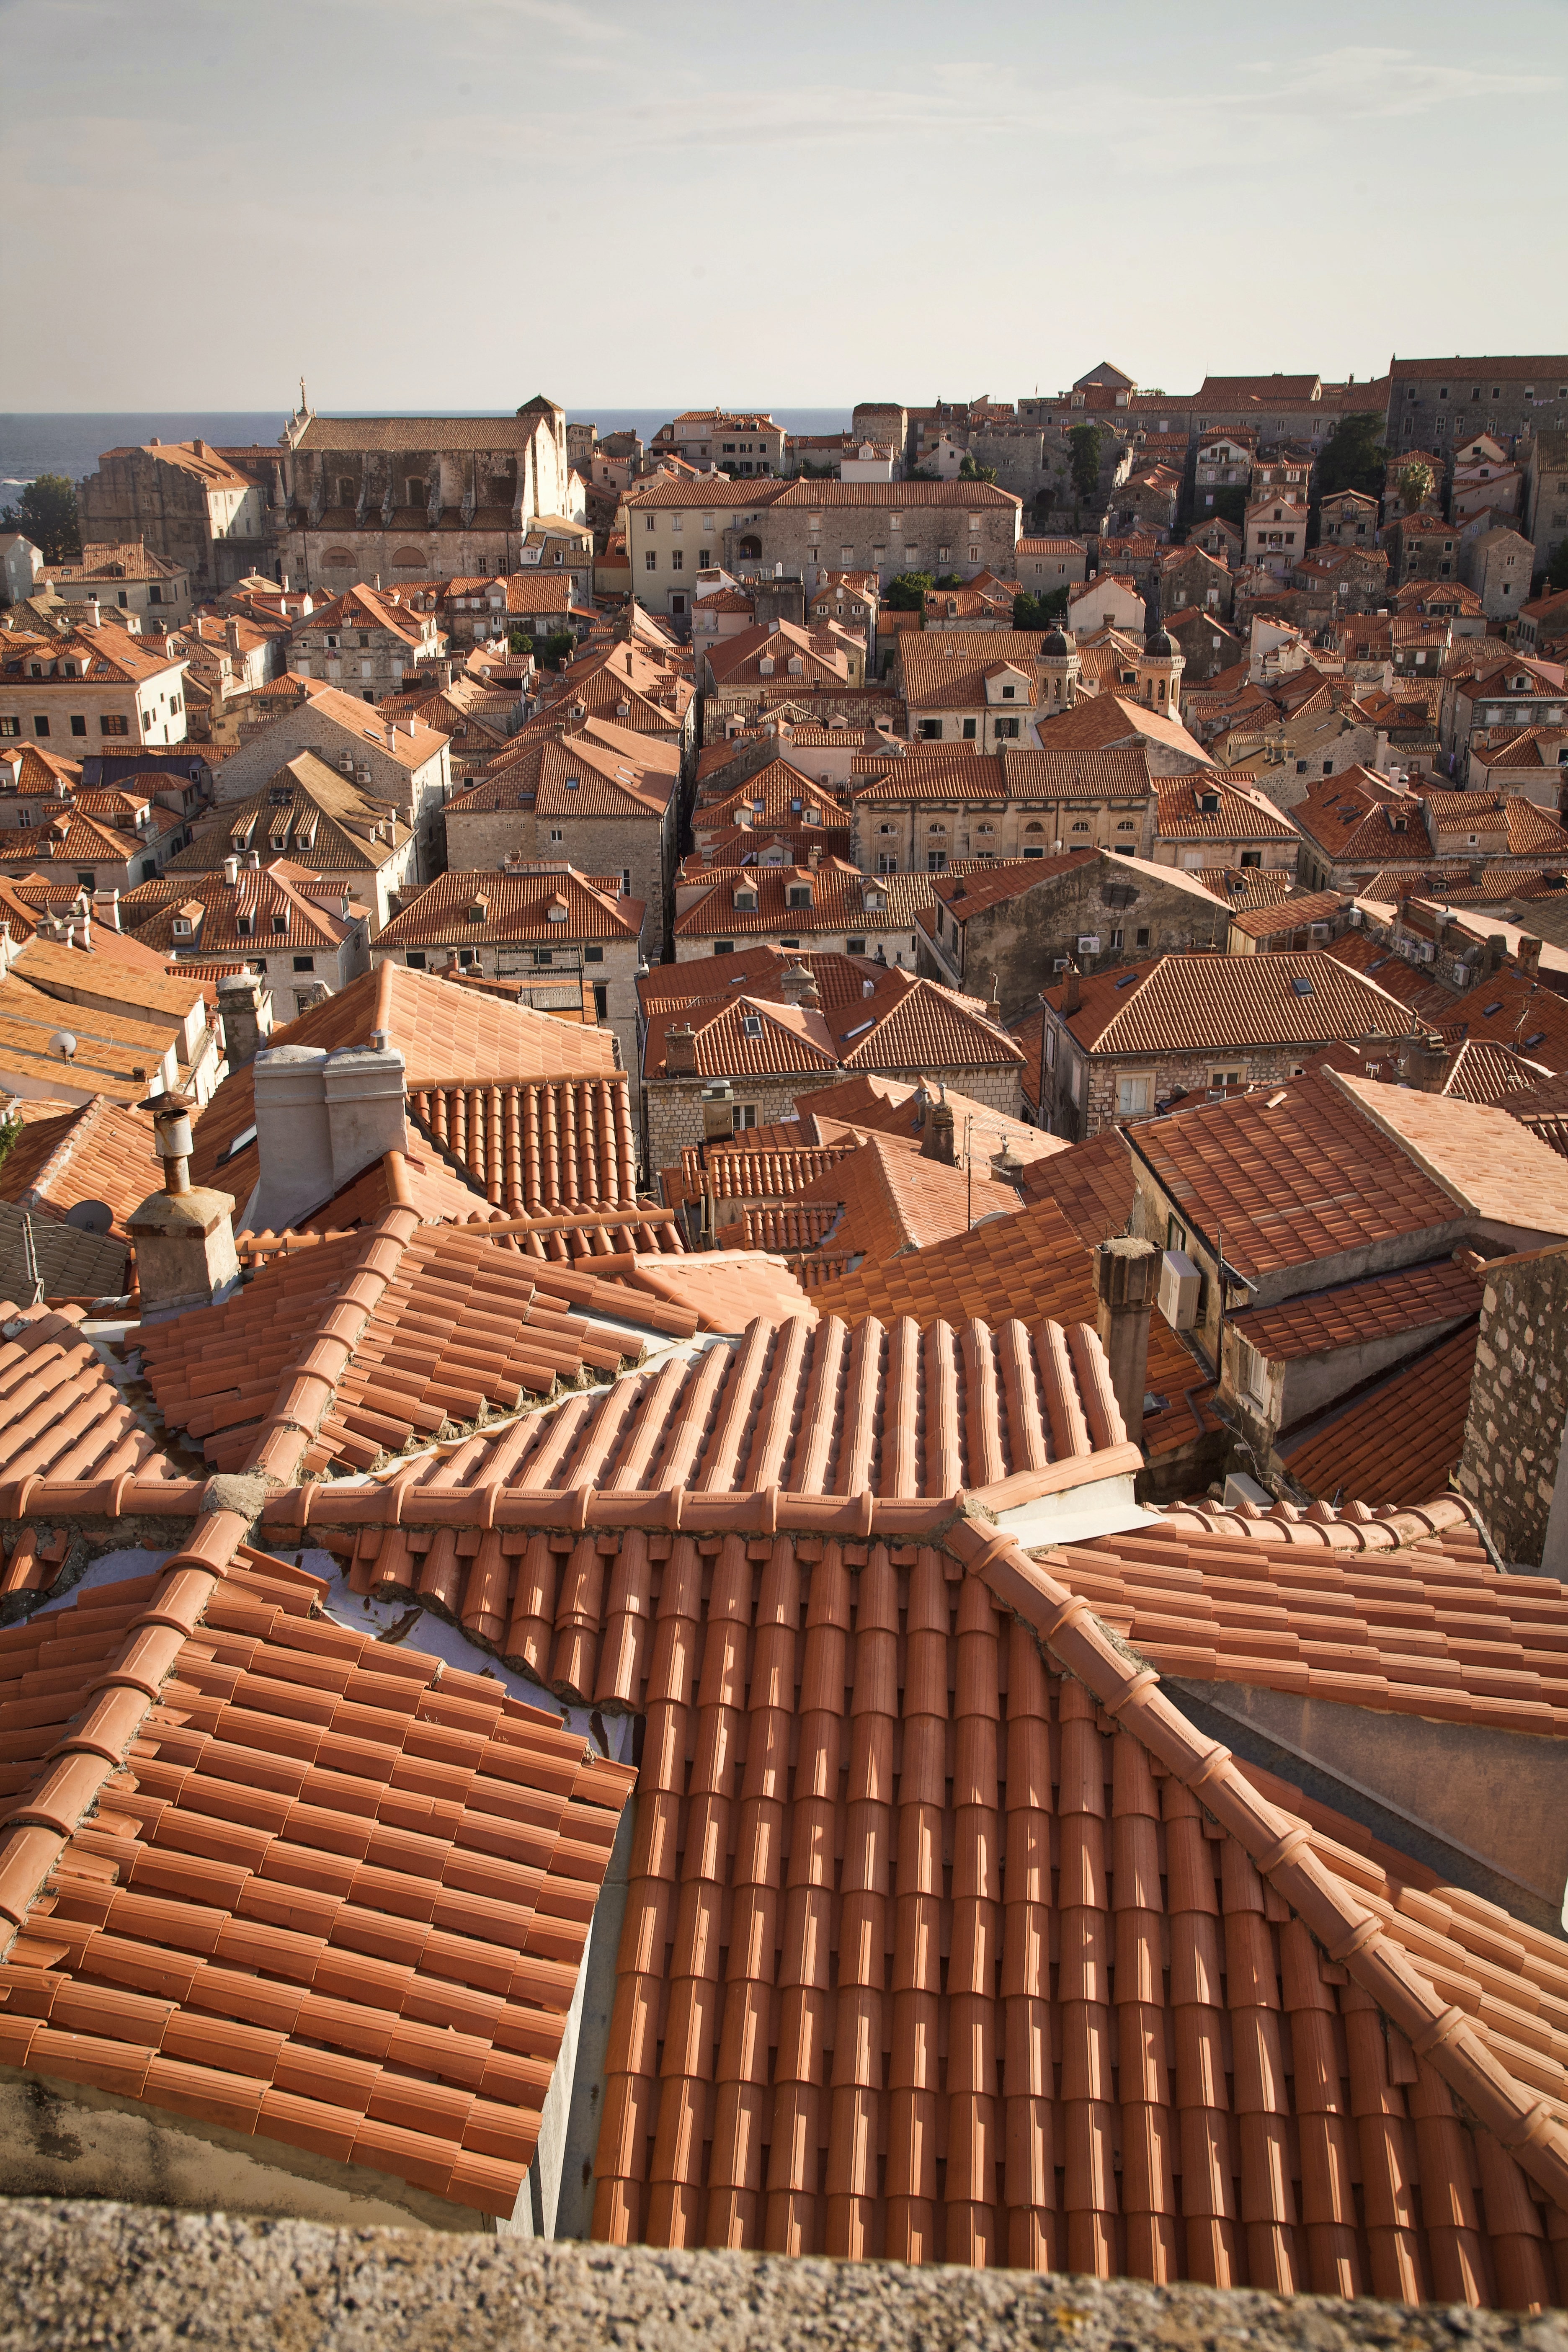 cities, city, building, view from above, roof, roofs